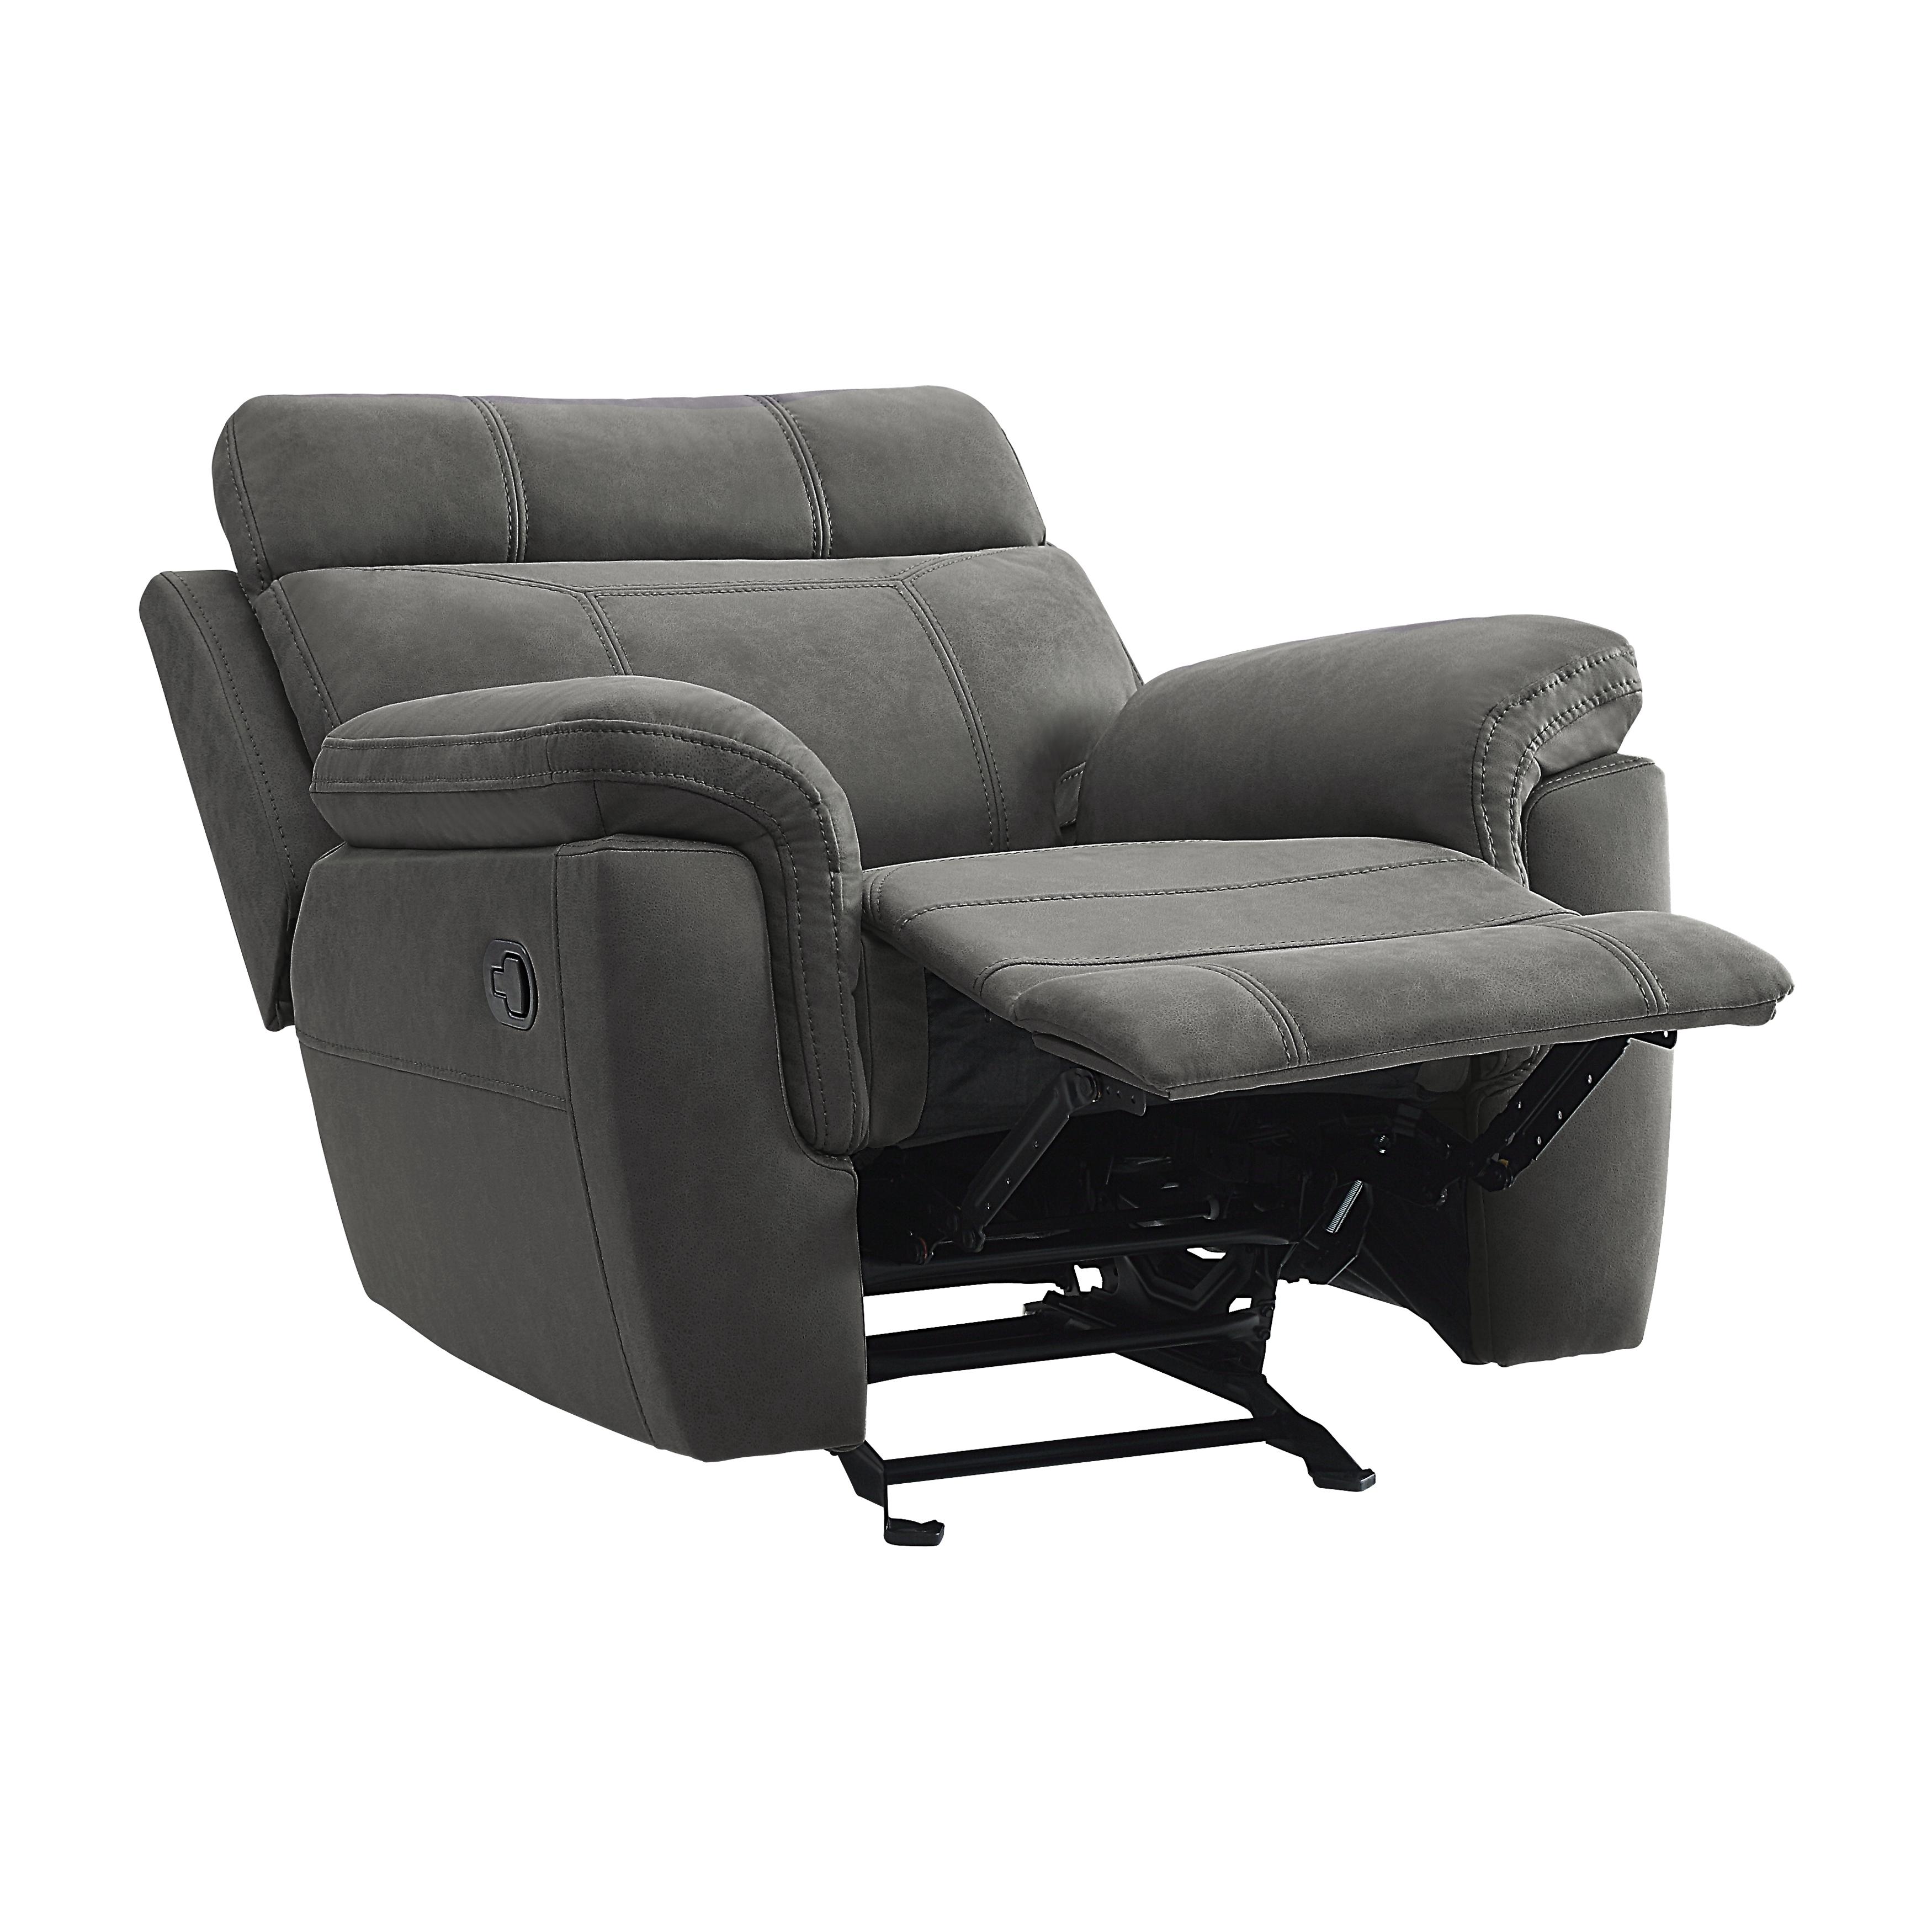 

    
Homelegance 9301GRY-1 Clifton Reclining Chair Gray 9301GRY-1
